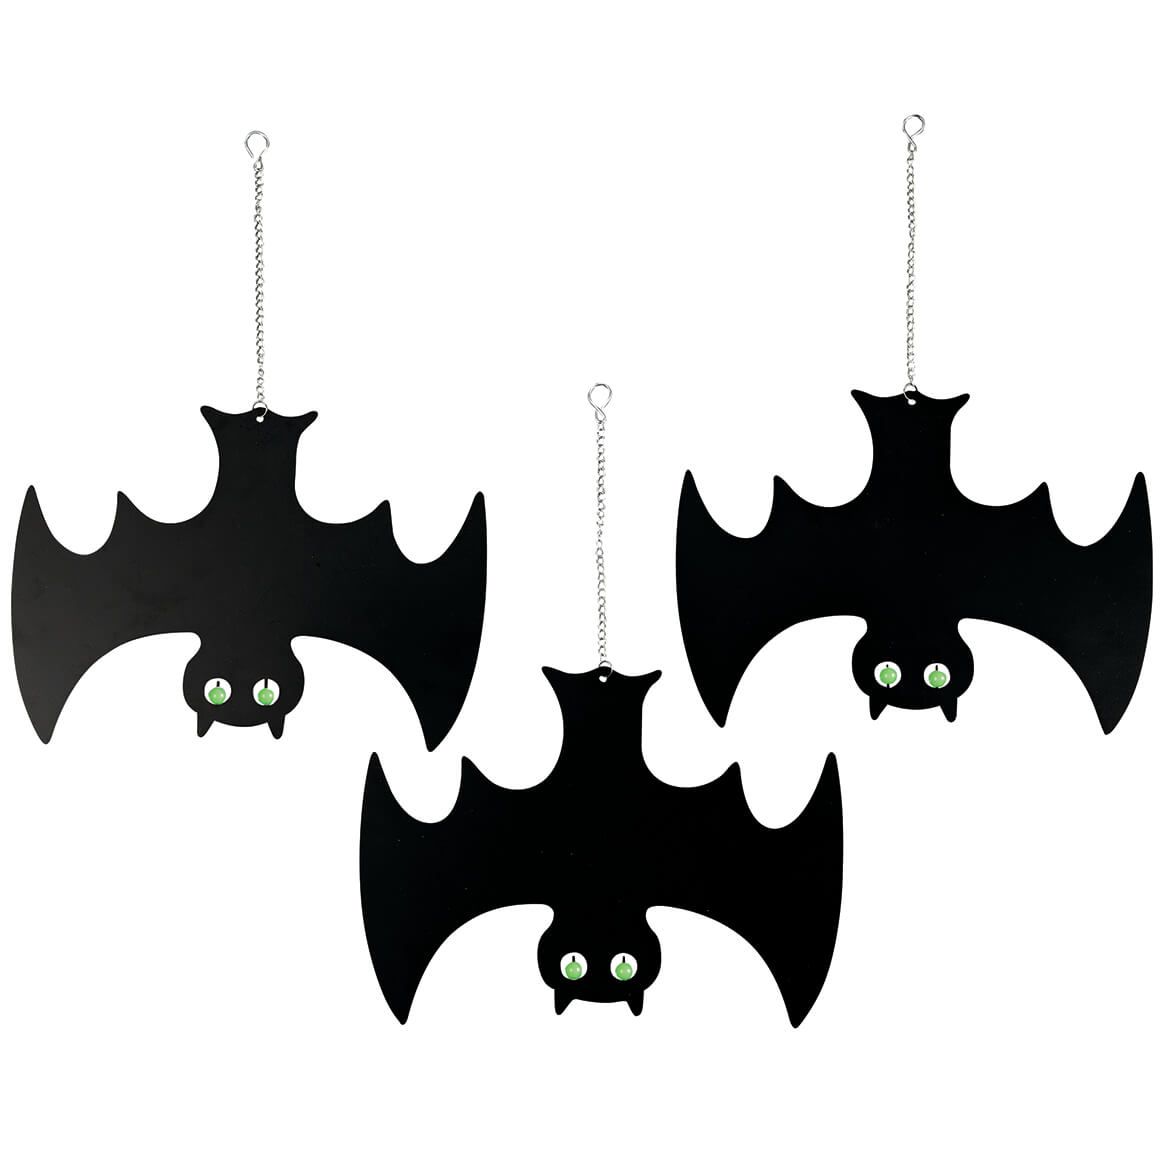 Glow-In-the-Dark Bats, Set of 3 by Fox River Creations - Miles Kimball